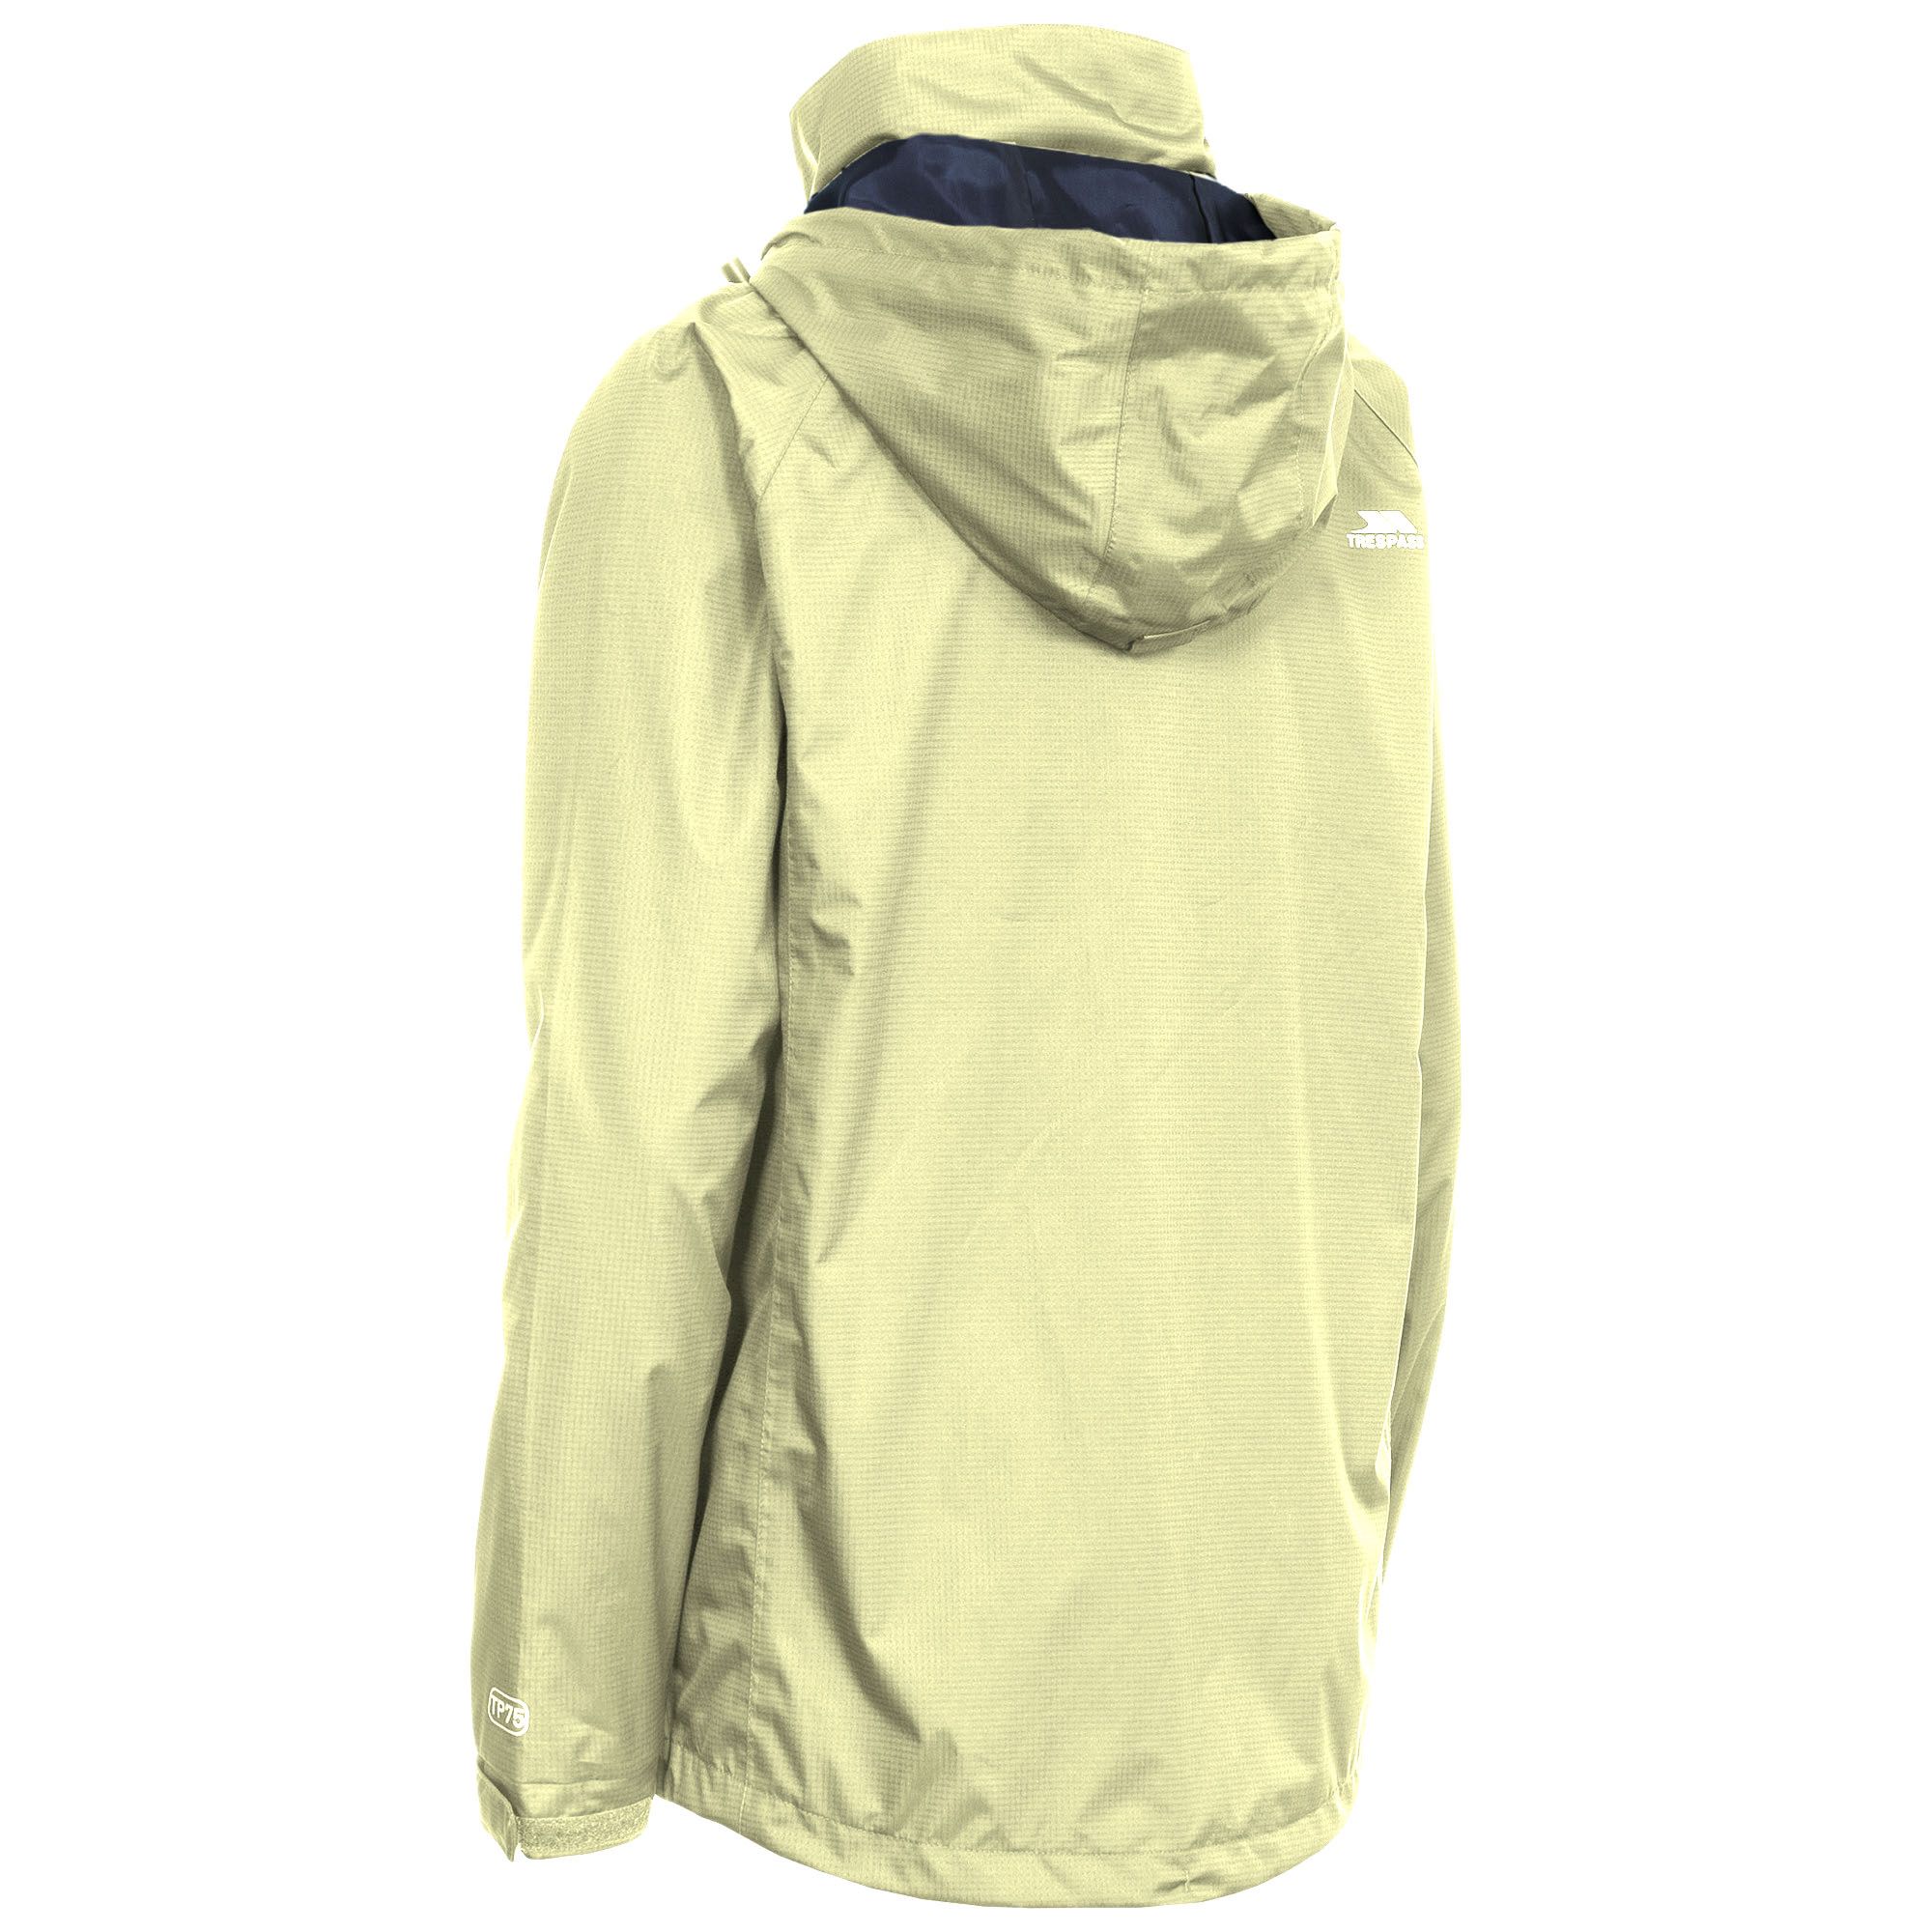 Waterproof jacket with contrast mesh lining. Hood packs into collar. 2 zips pockets. Elasticated cuffs with adjustable tabs. Drawcord at hem. Waterproof 3000mm, breathable 3000mvp, windproof, taped seams. Shell: 100% polyester. Lining: 100% polyester mesh. Trespass Womens Chest Sizing (approx): XS/8 - 32in/81cm, S/10 - 34in/86cm, M/12 - 36in/91.4cm, L/14 - 38in/96.5cm, XL/16 - 40in/101.5cm, XXL/18 - 42in/106.5cm.